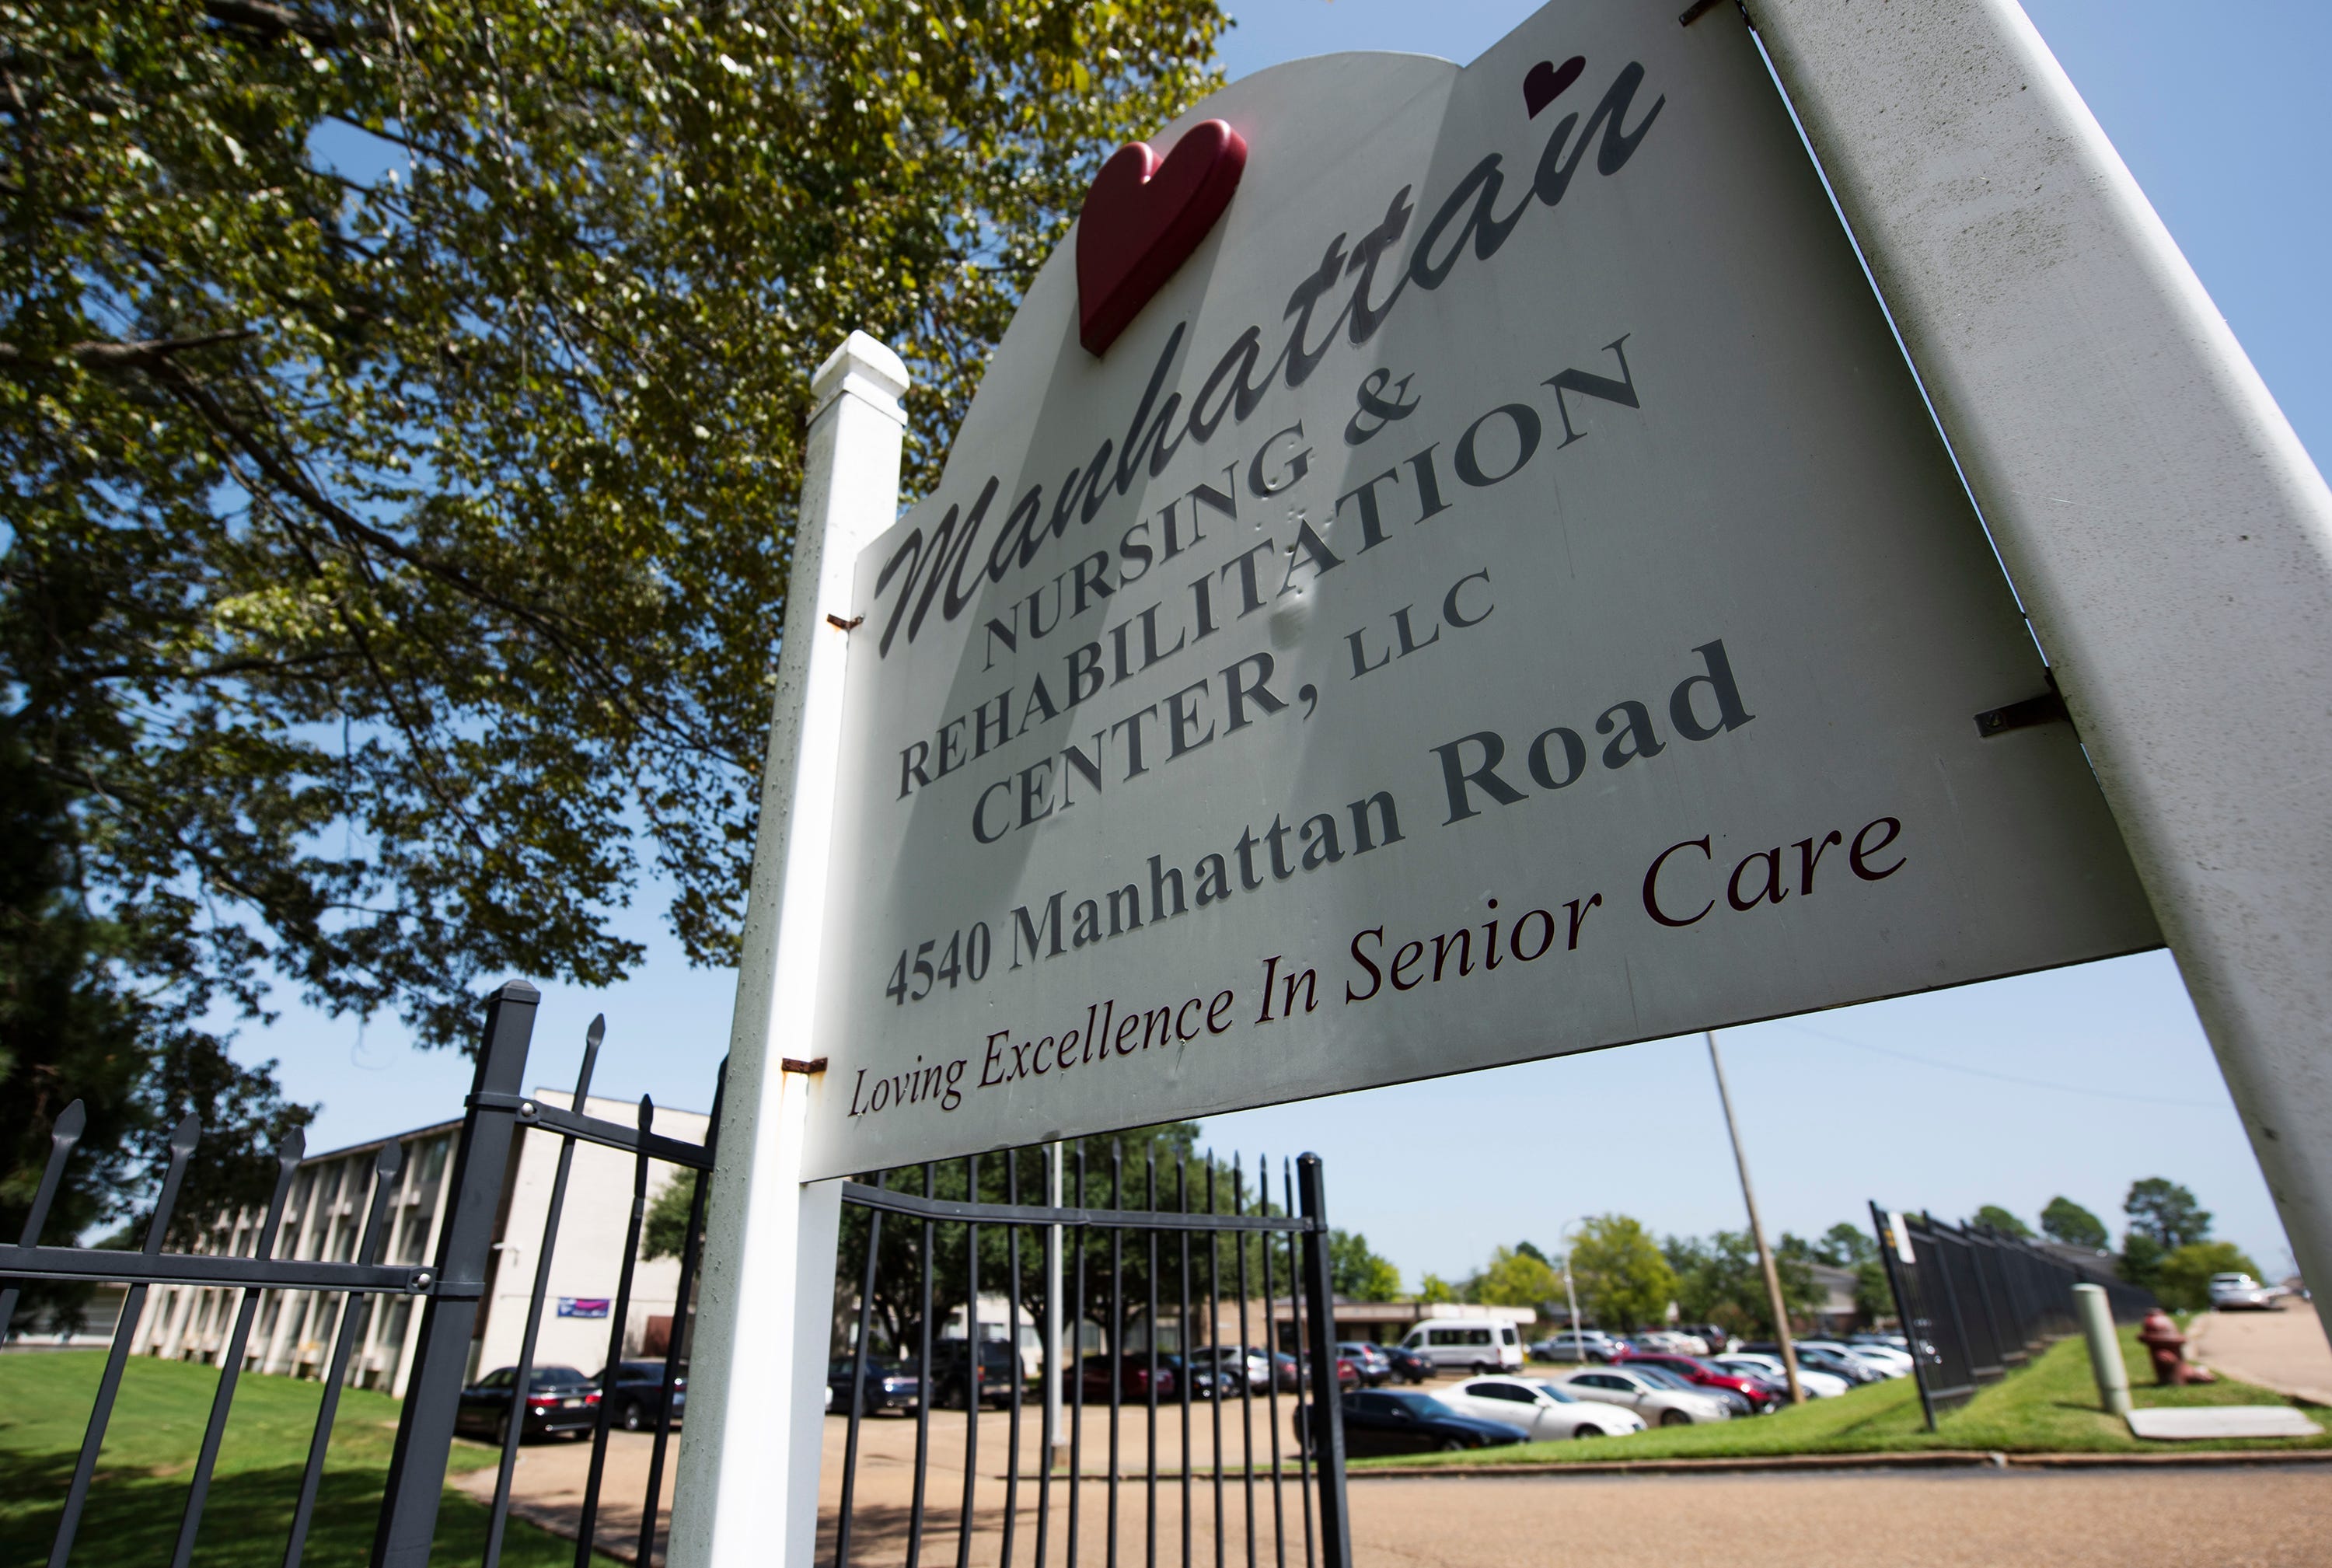 In September 2020, the Mississippi Department of Health said Manhattan Nursing Home in Jackson had the highest number of cumulative COVID-19 deaths among residents in long-term care facilities in Hinds County.